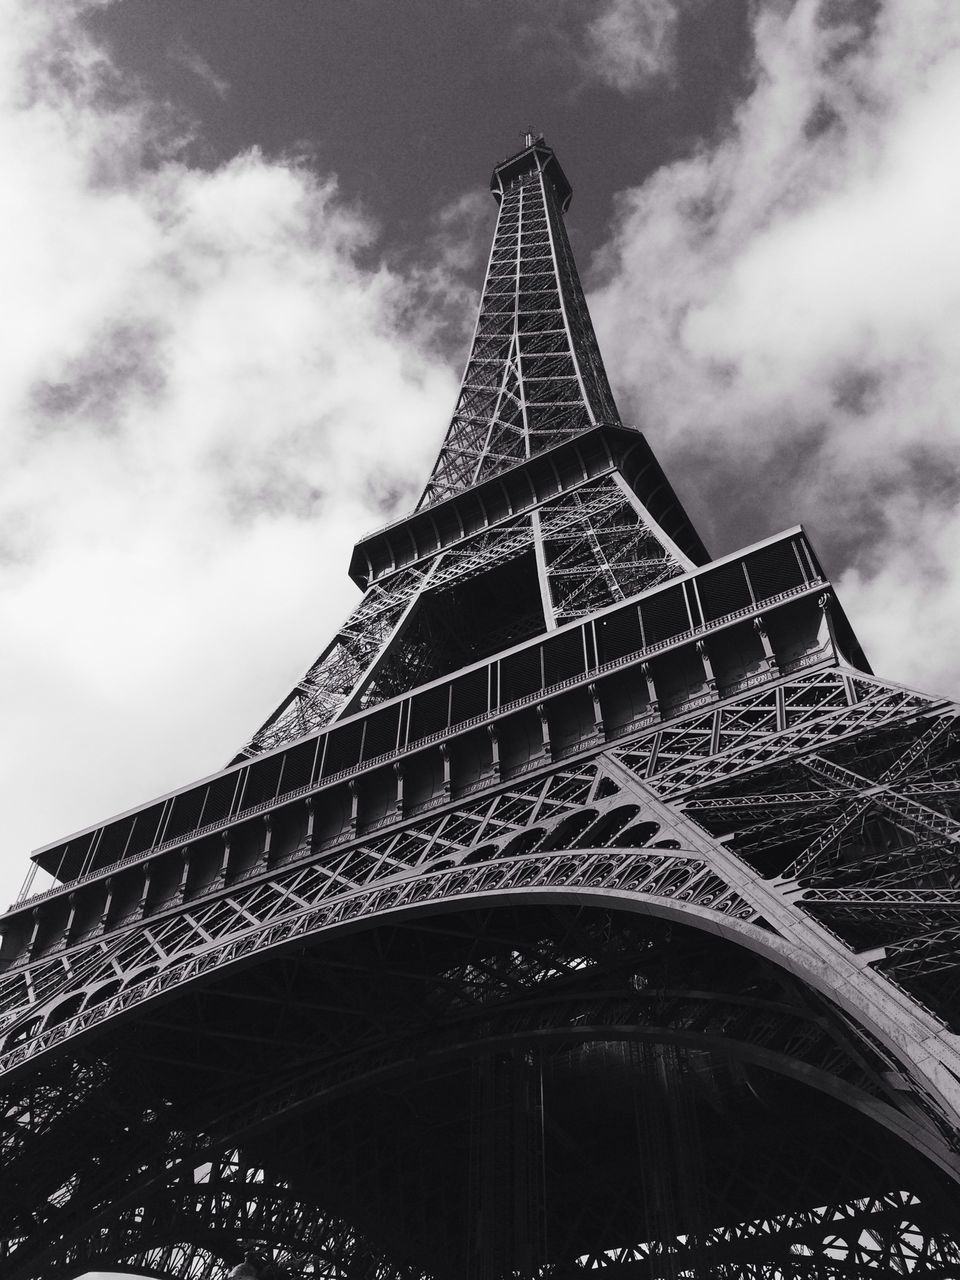 famous place, eiffel tower, architecture, international landmark, travel destinations, built structure, tourism, capital cities, low angle view, tower, travel, culture, tall - high, sky, architectural feature, city, history, metal, building exterior, cloud - sky